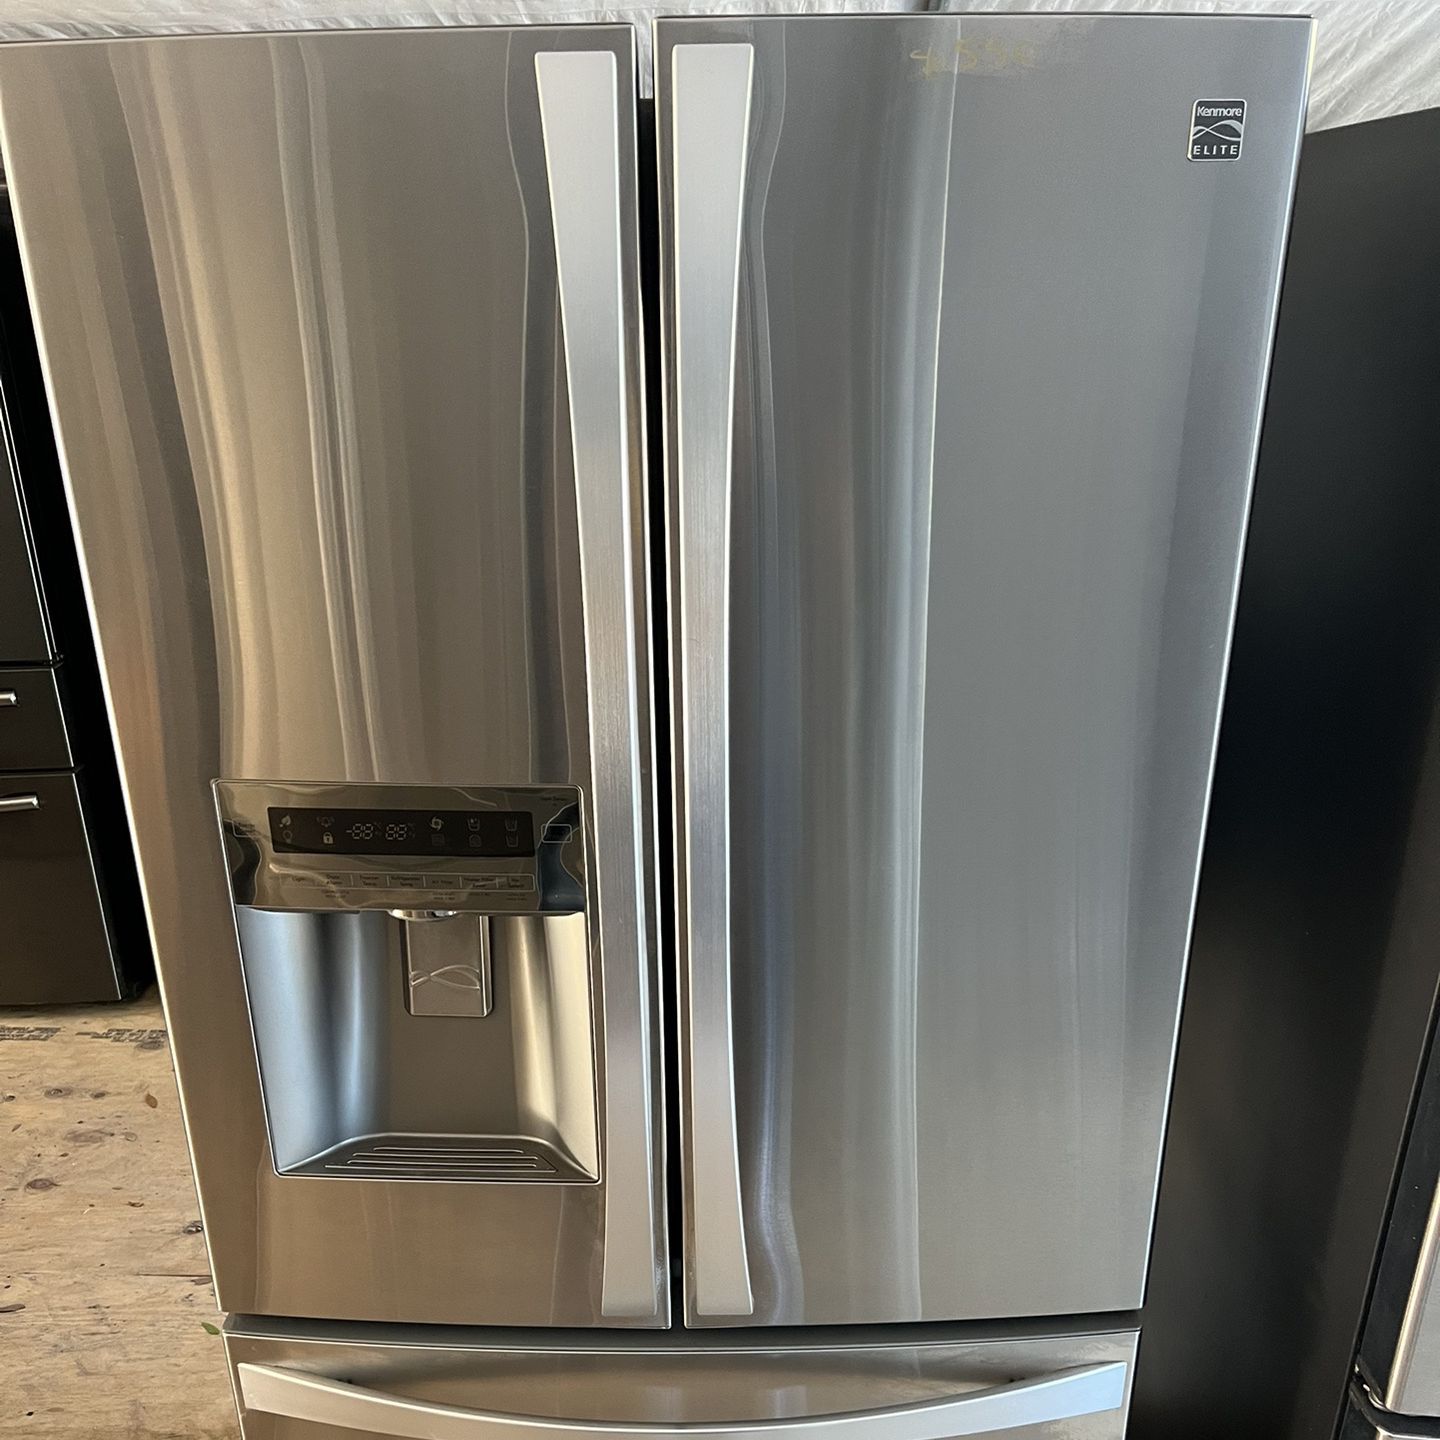 Kenmore Elite French Door Refrigerator  60 day warranty/ Located at:📍5415 Carmack Rd Tampa Fl 33610📍